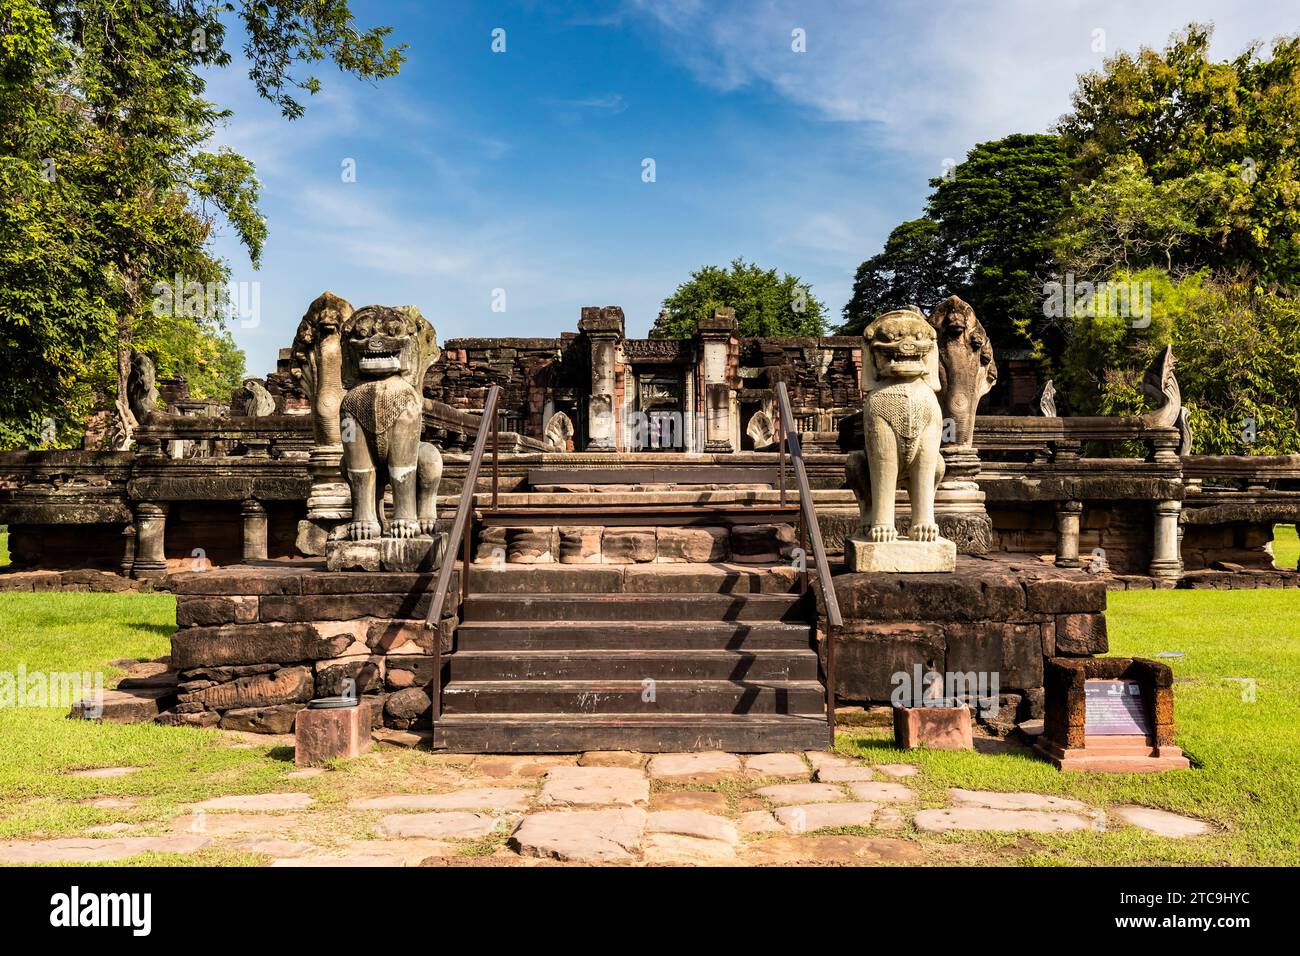 Phimai Historical Park, Ancient Khmer temple, approach steps with guardian lion statues, Nakhon Ratchasima, Isan, Thailand, Southeast Asia, Asia Stock Photo